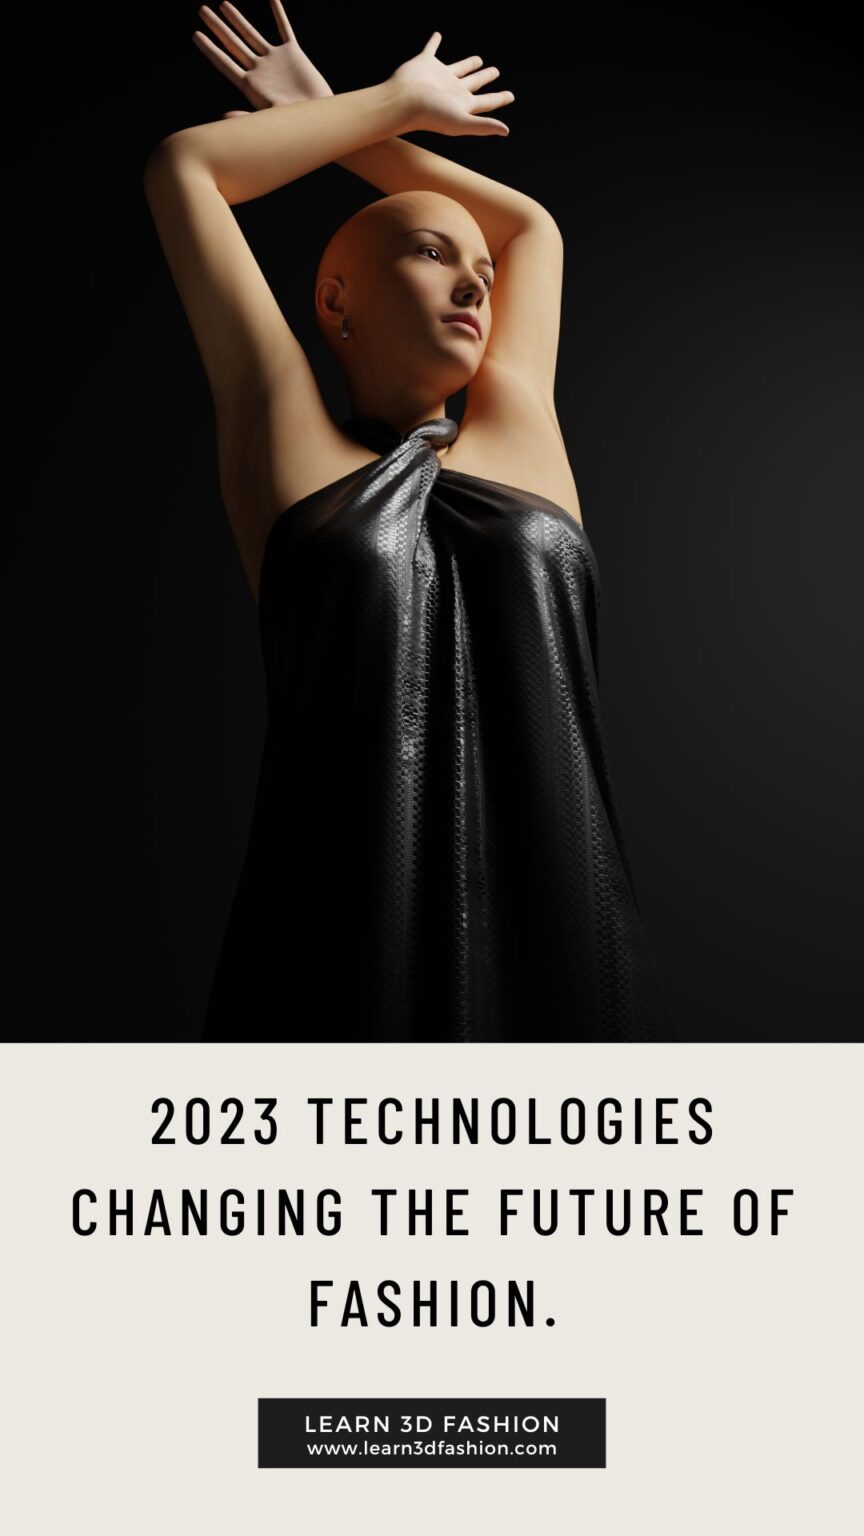 2023 technologies changing the future of Fashion.